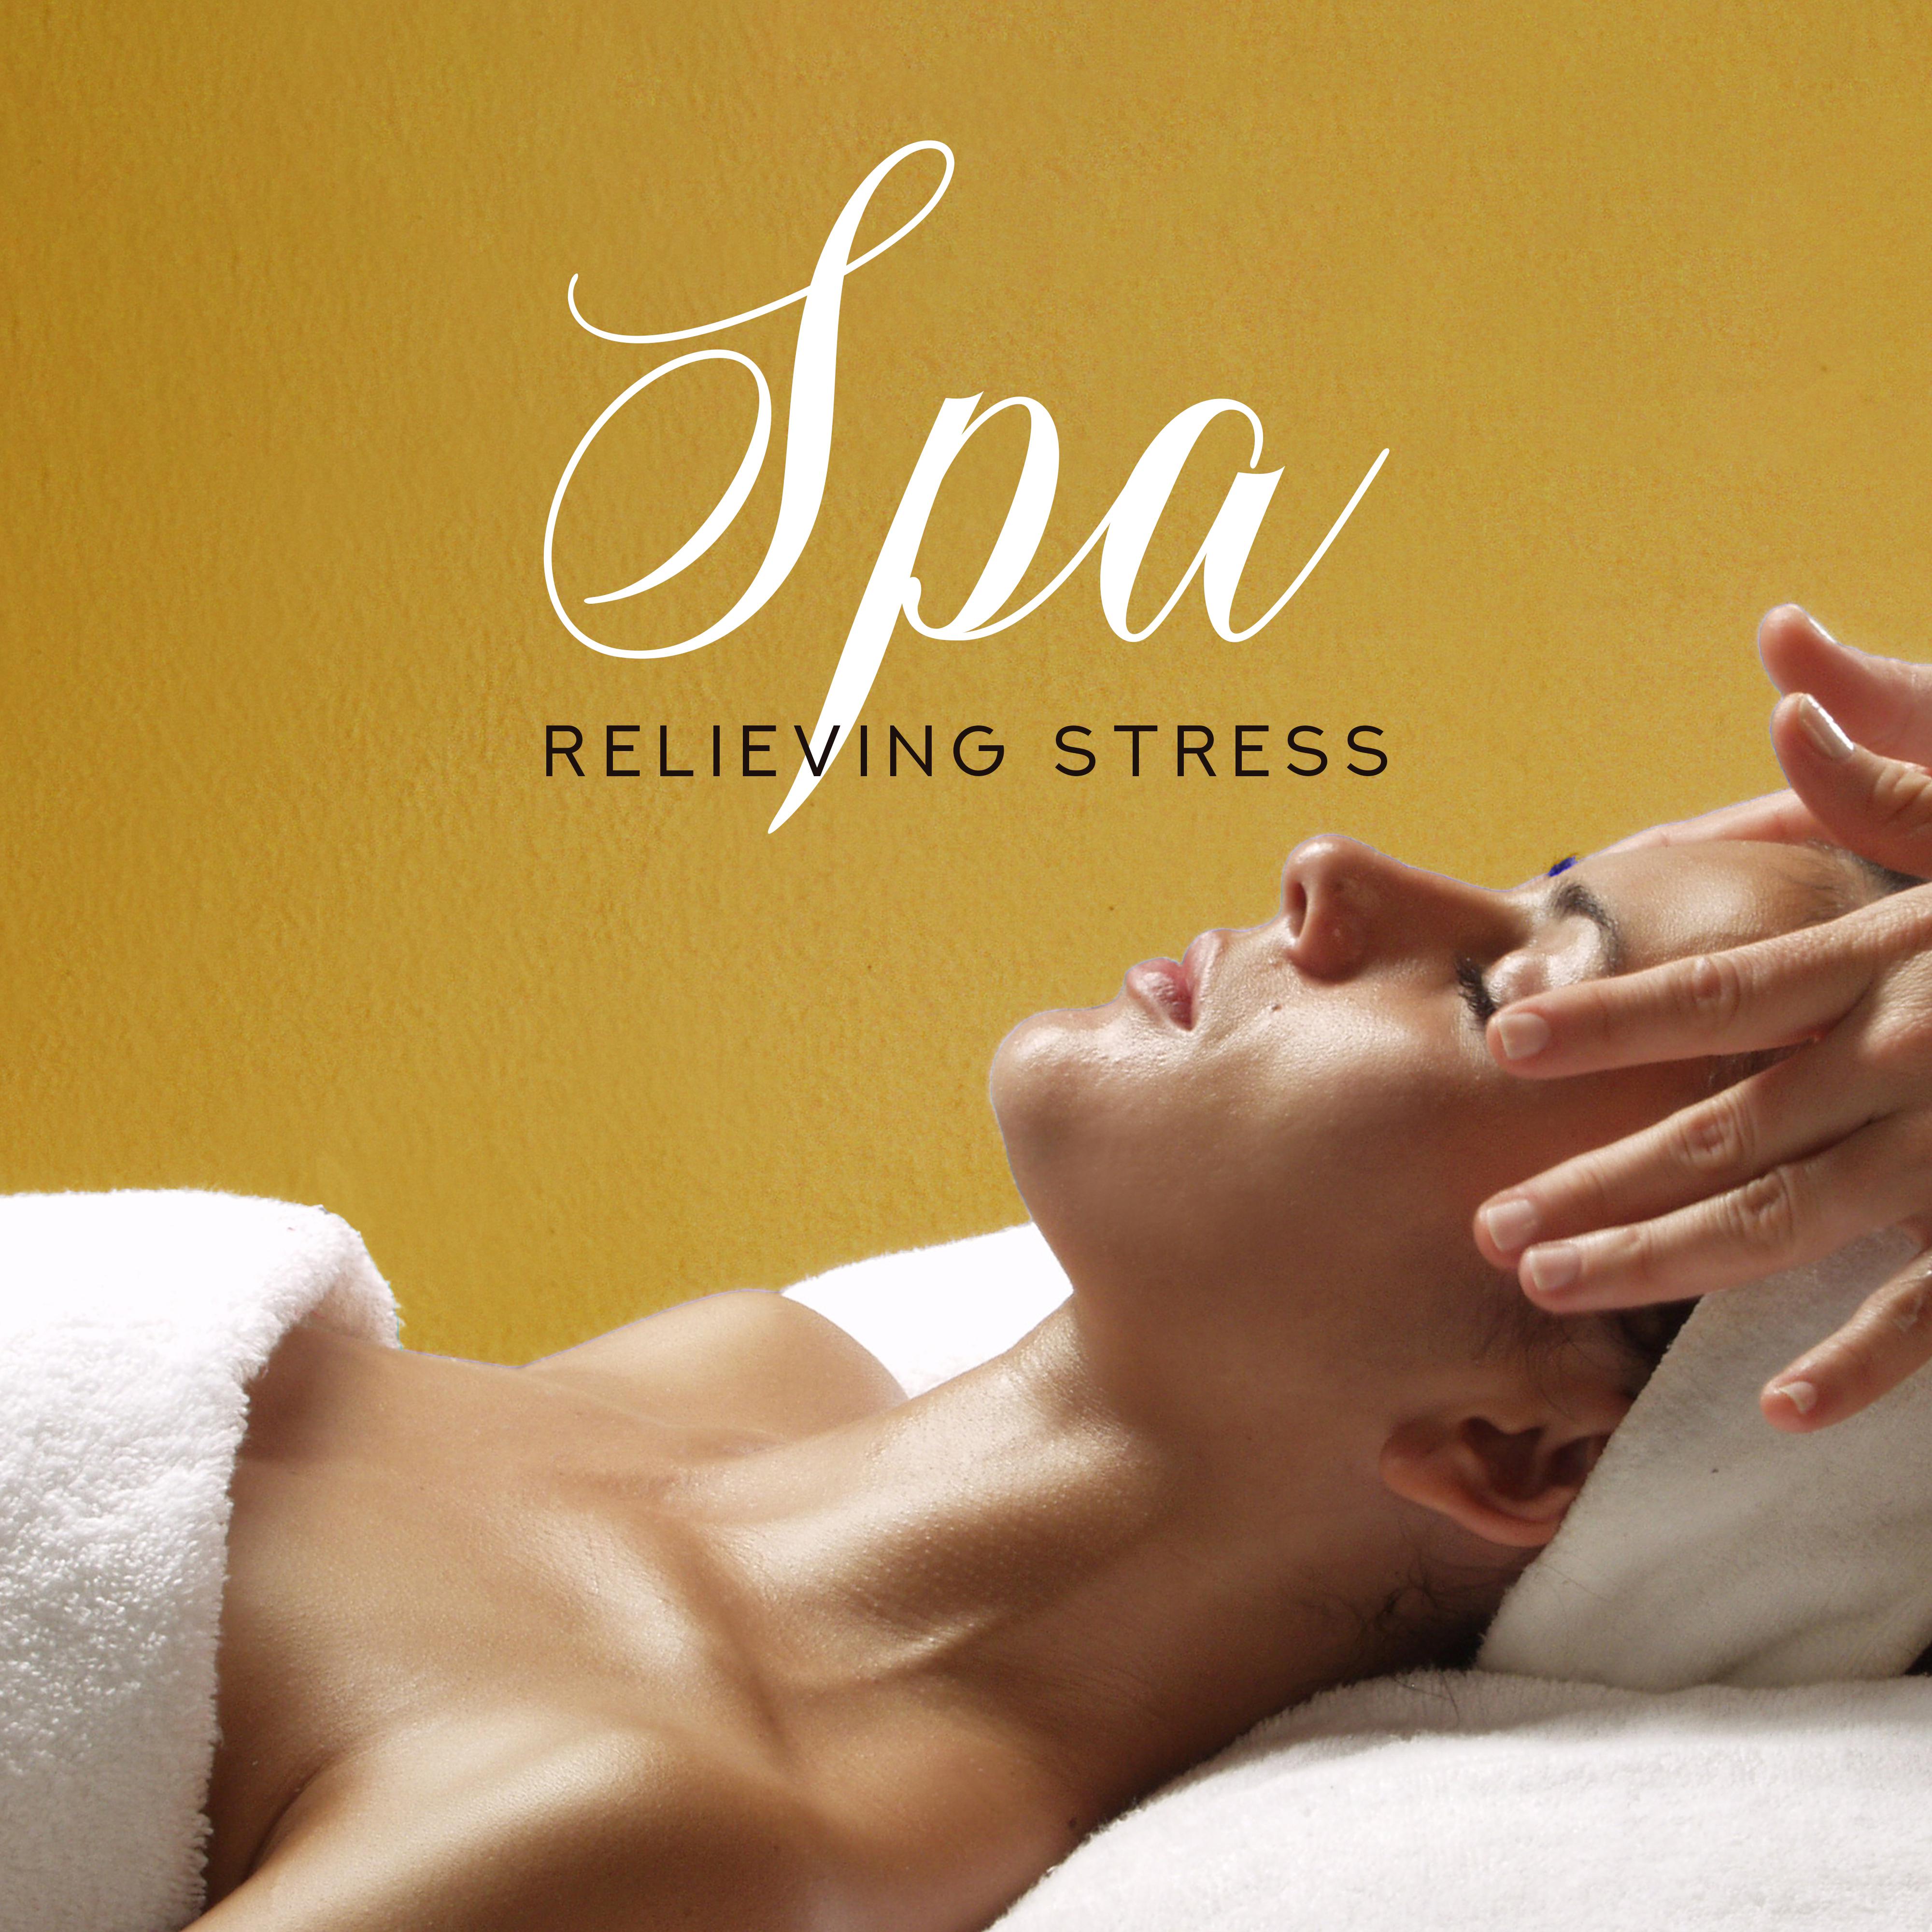 Spa Relieving Stress - Gentle Ambient Melodies for Rest, Total Relaxation and De-stressing